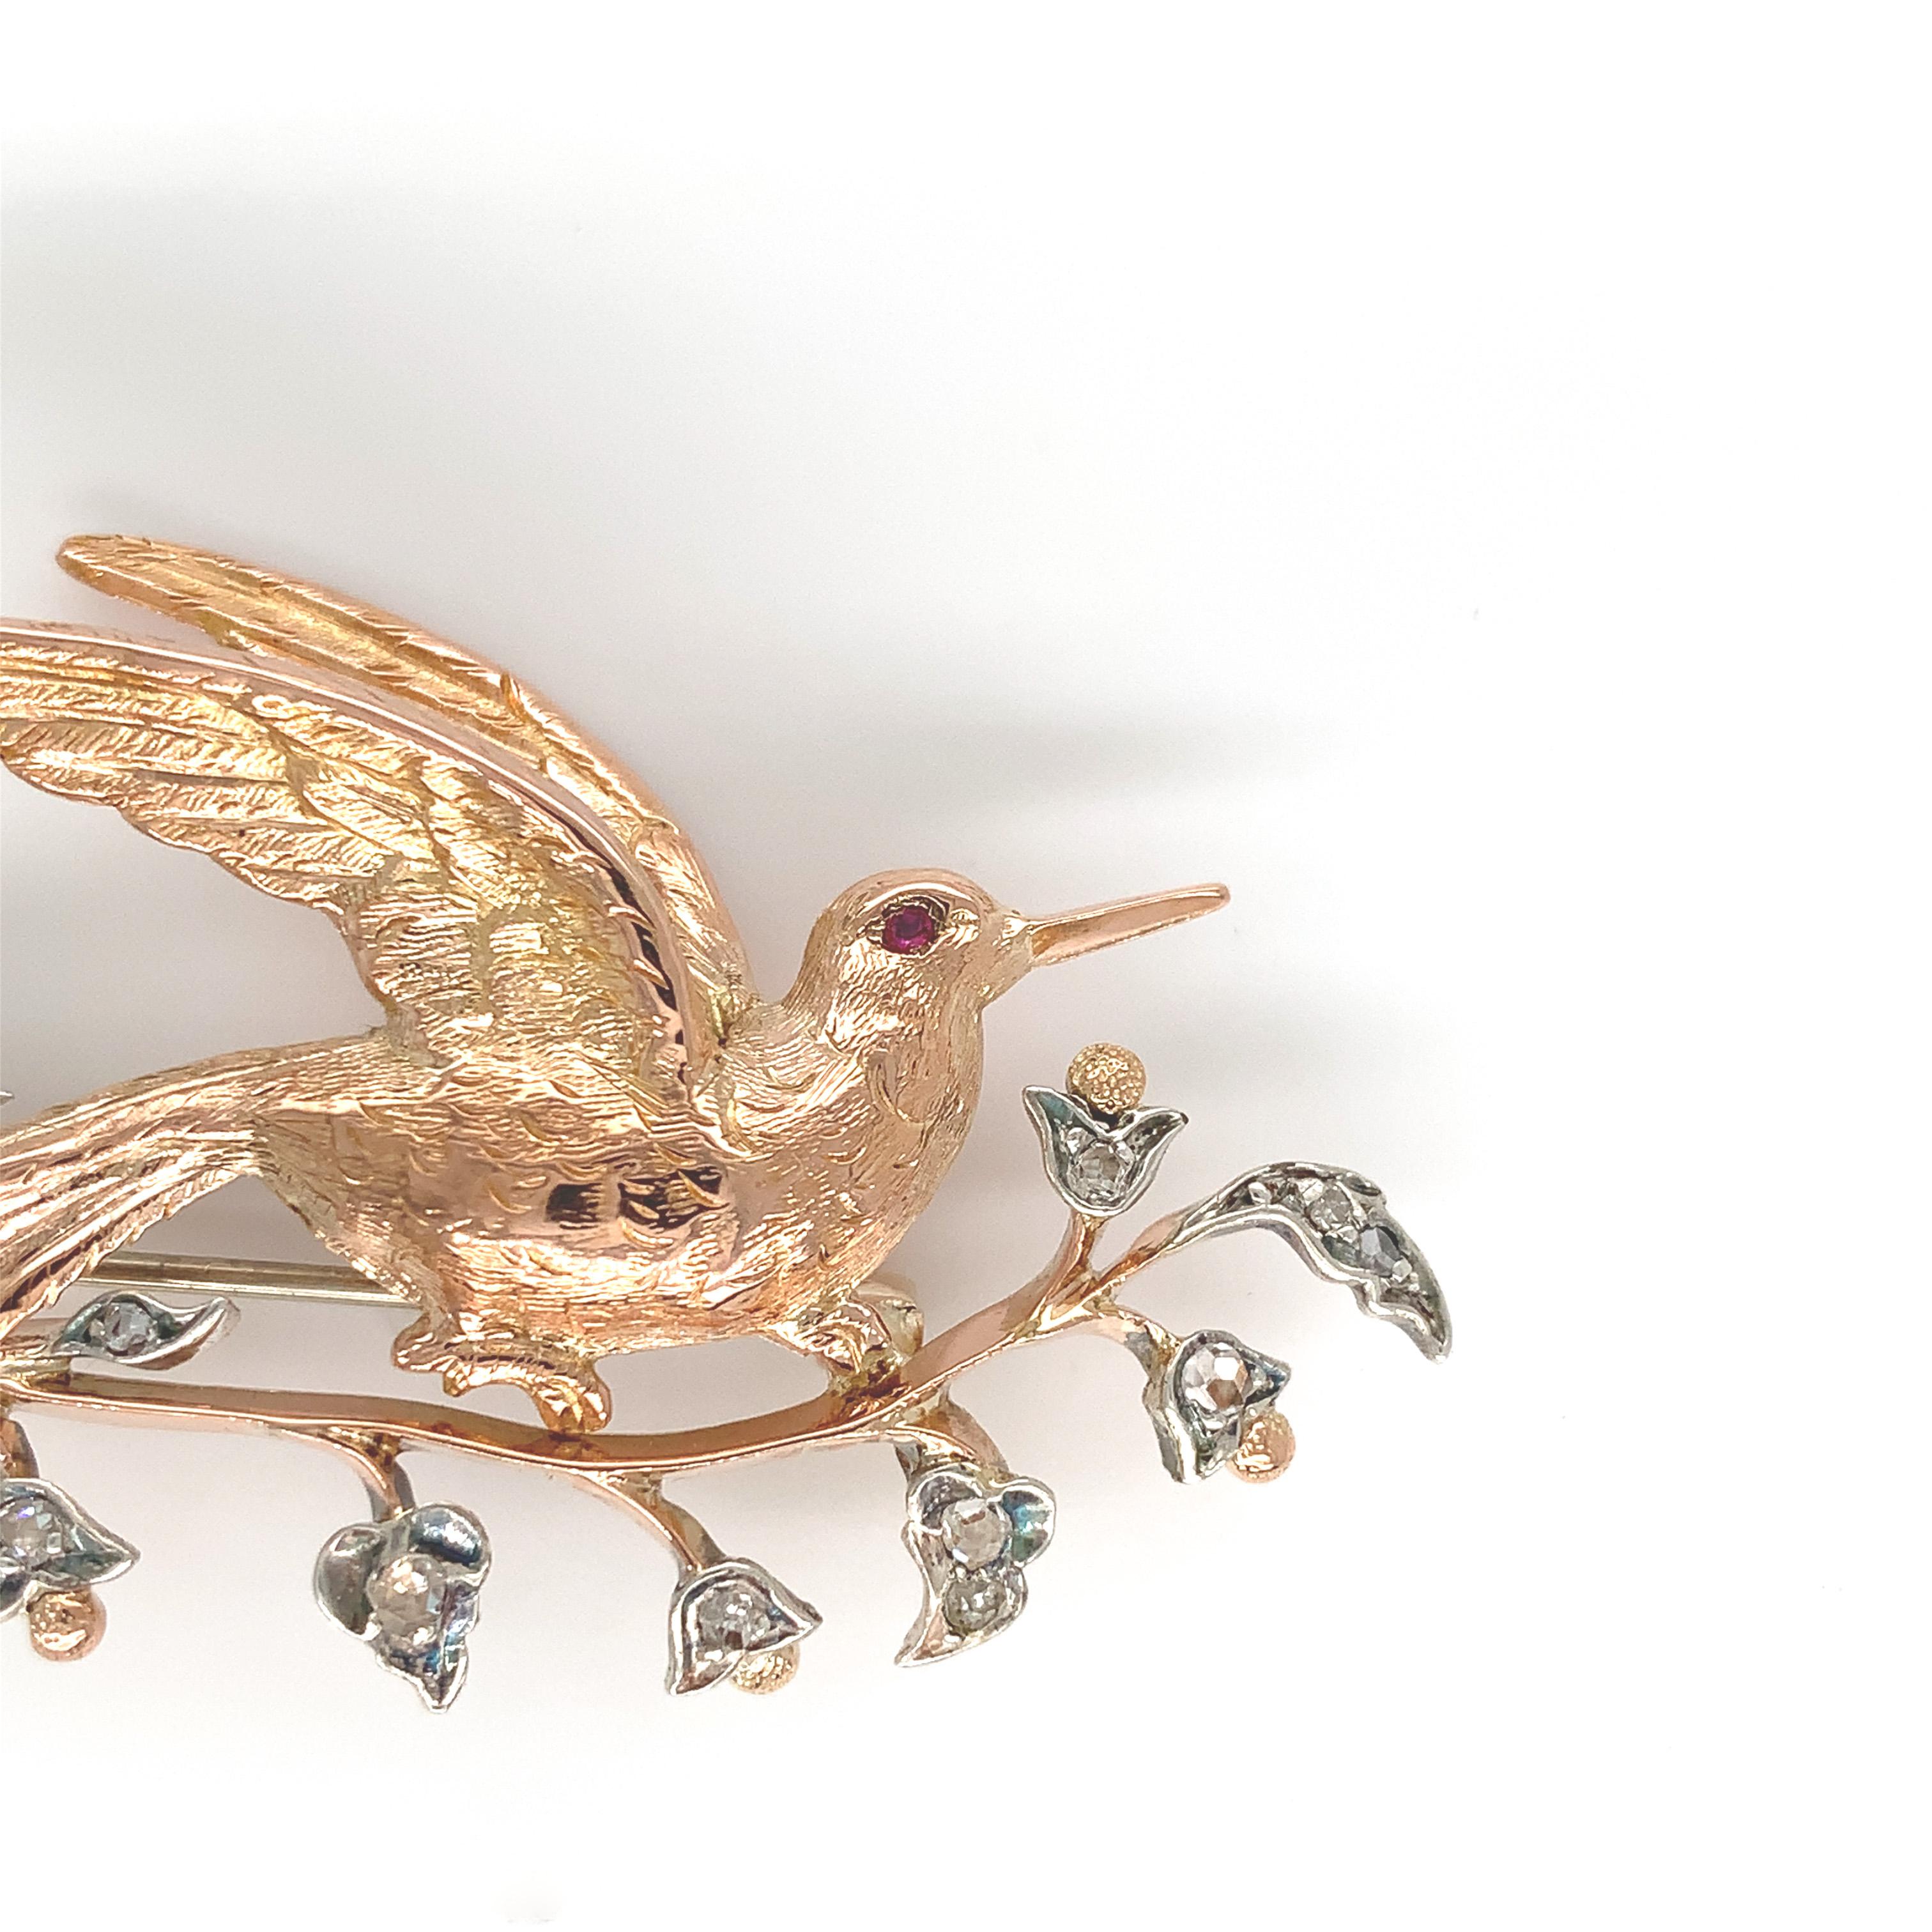 14K rosey yellow gold bird pin with early cut diamonds set in silver. The pin measures 2